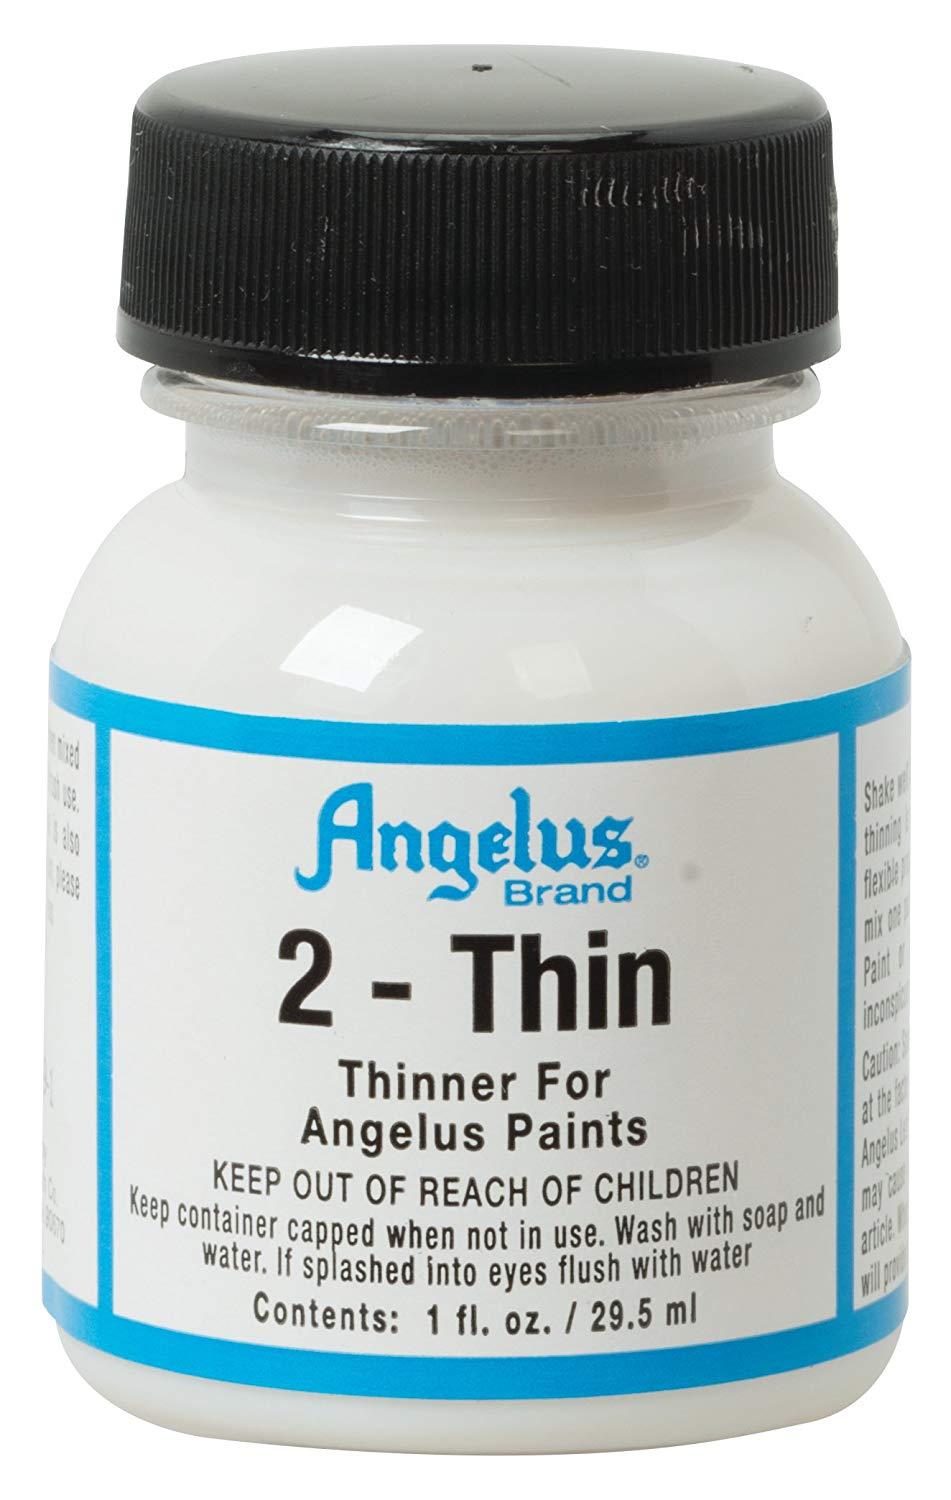 Buy Angelus Top Products Online at Best 